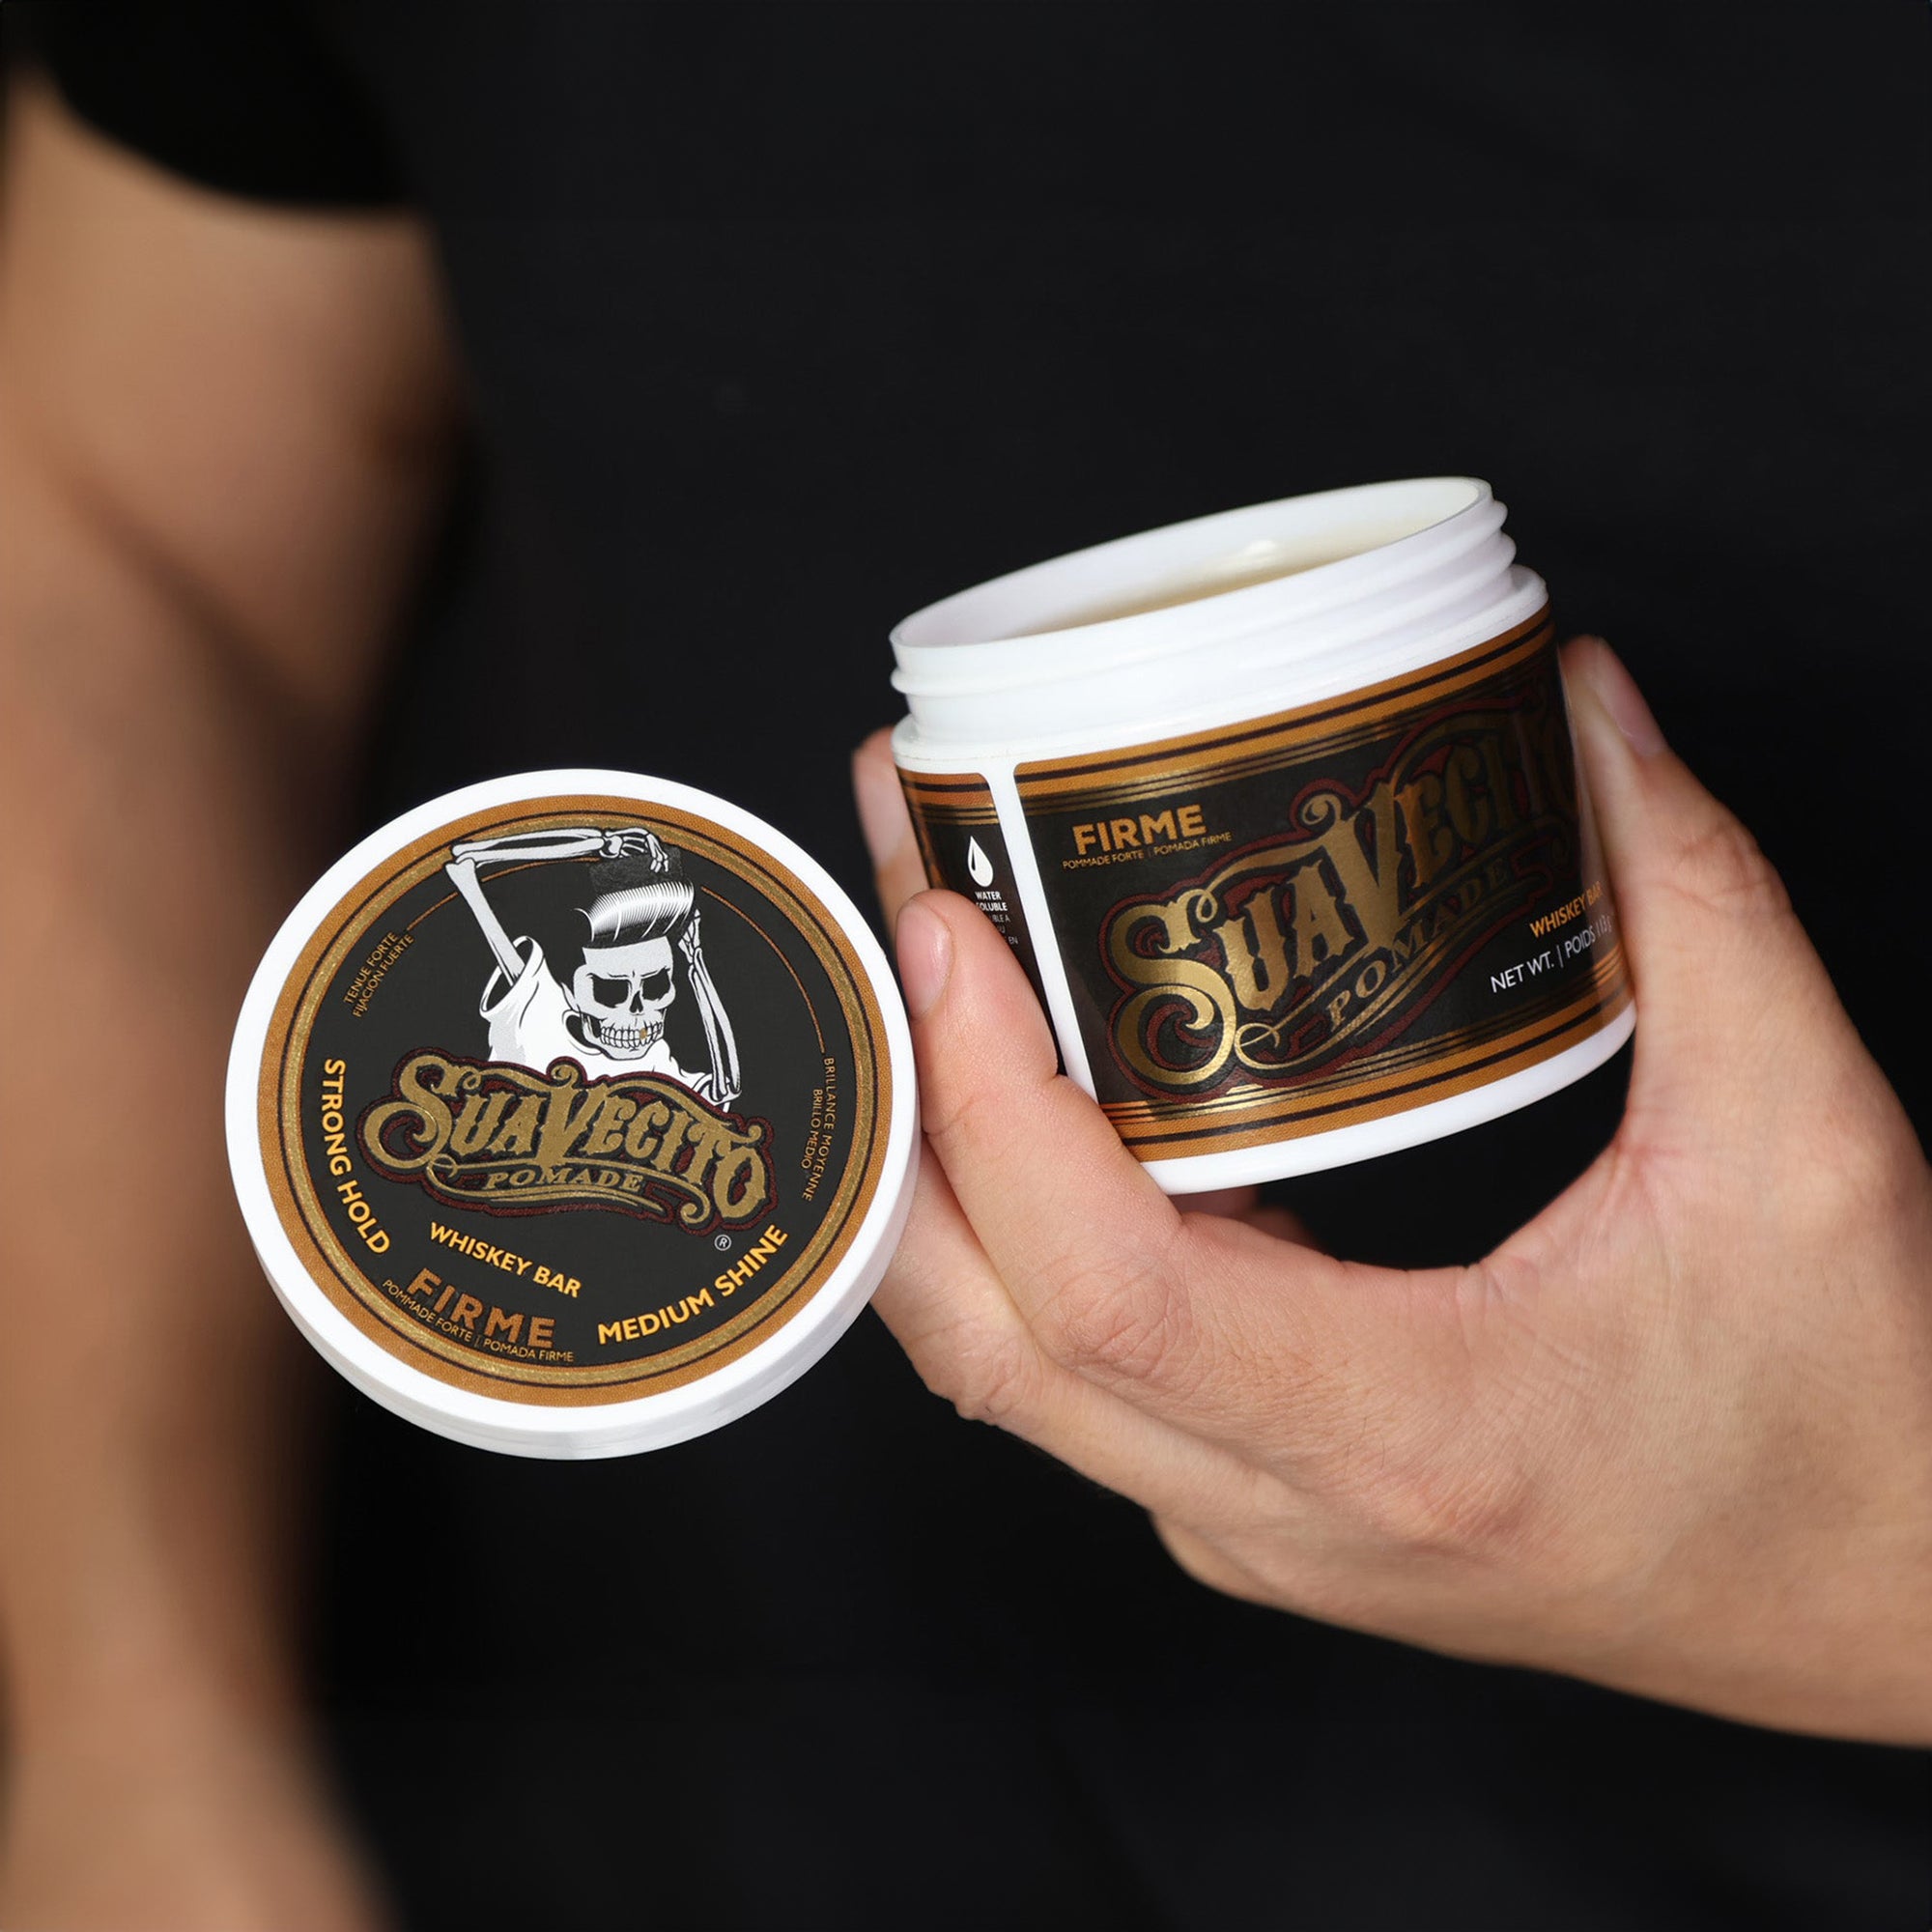 Suavecito Firme (Strong) Hold Pomade - Whiskey Bar / 4 OZ